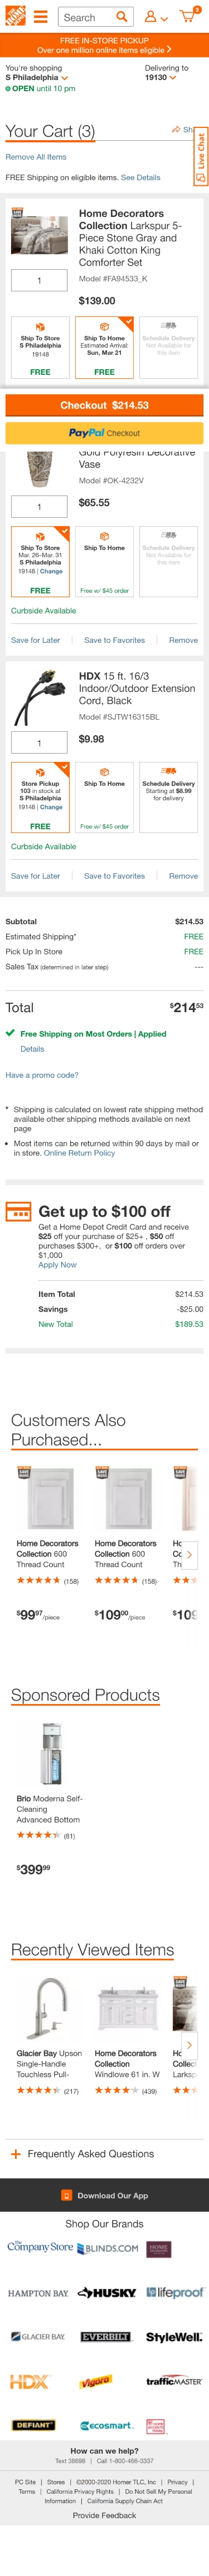 homedepot cart page mobile